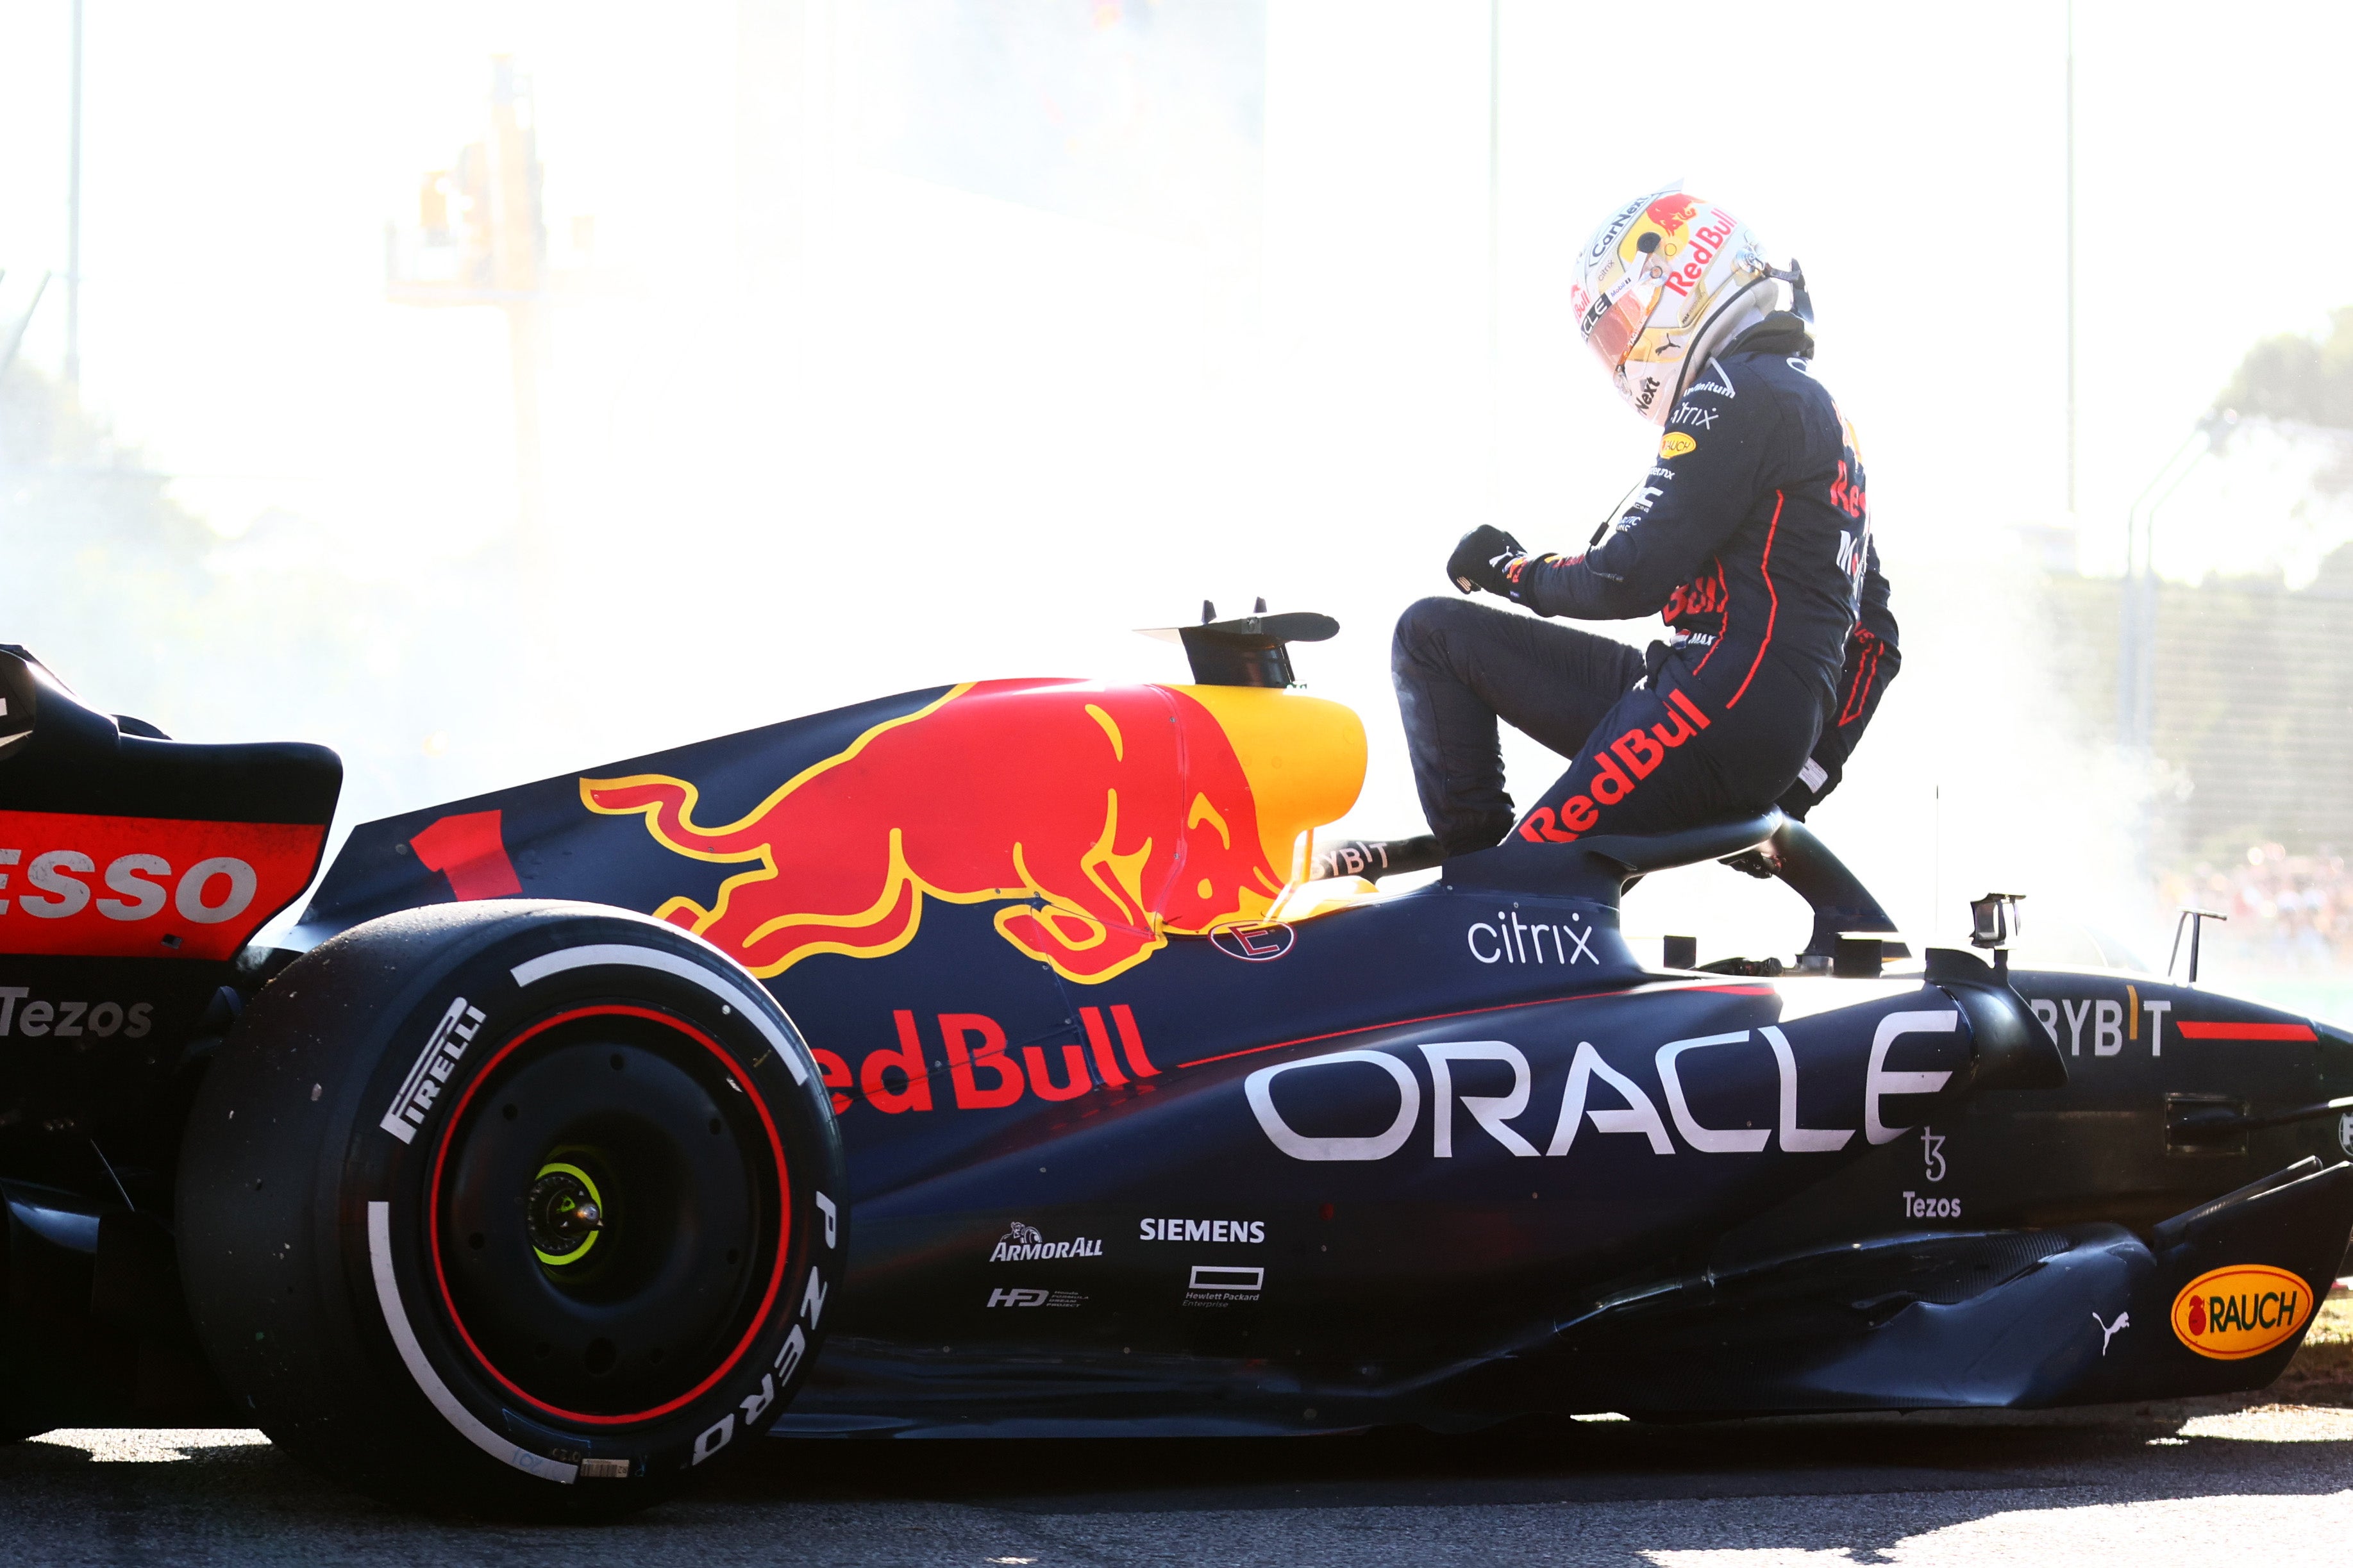 Max Verstappen suffered a fuel-related failure, according to Christian Horner.